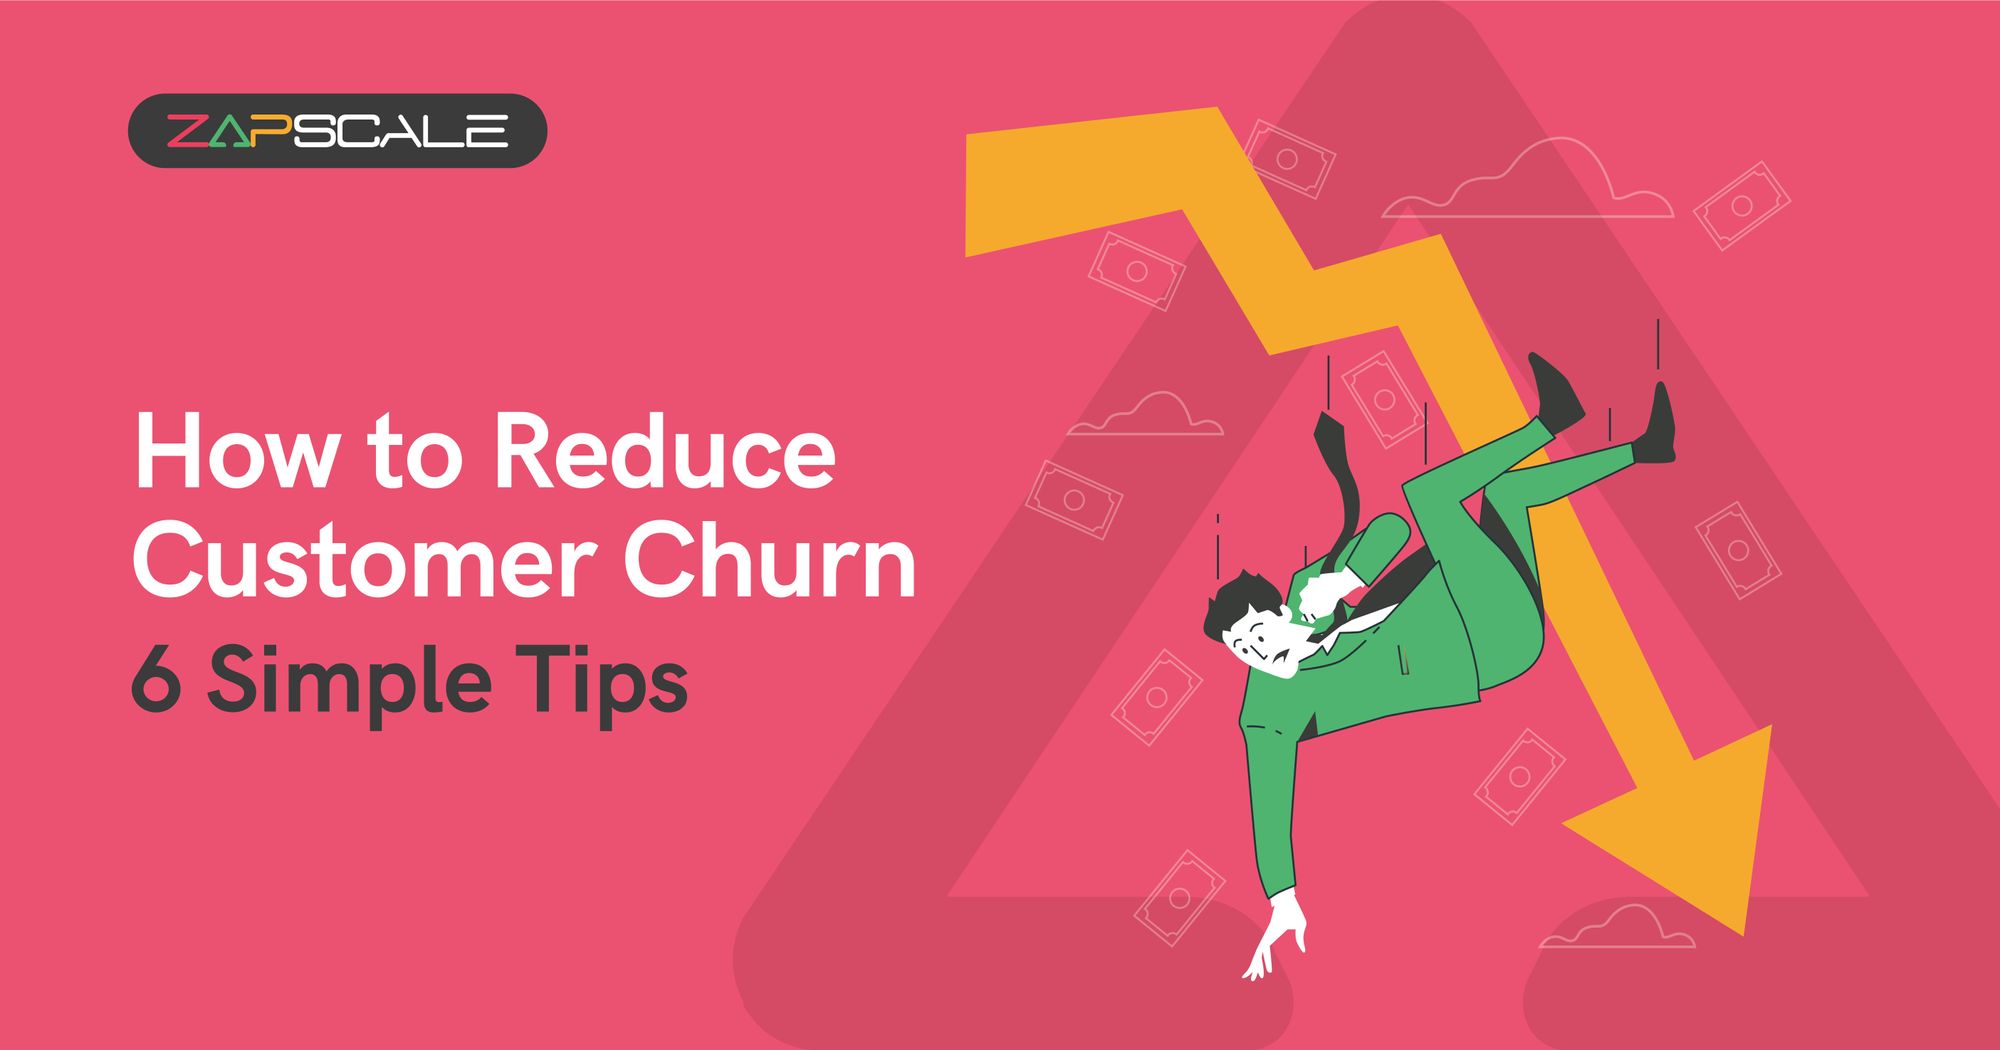 Need To Reduce Customer Churn? Explore These 6 Simple Tips